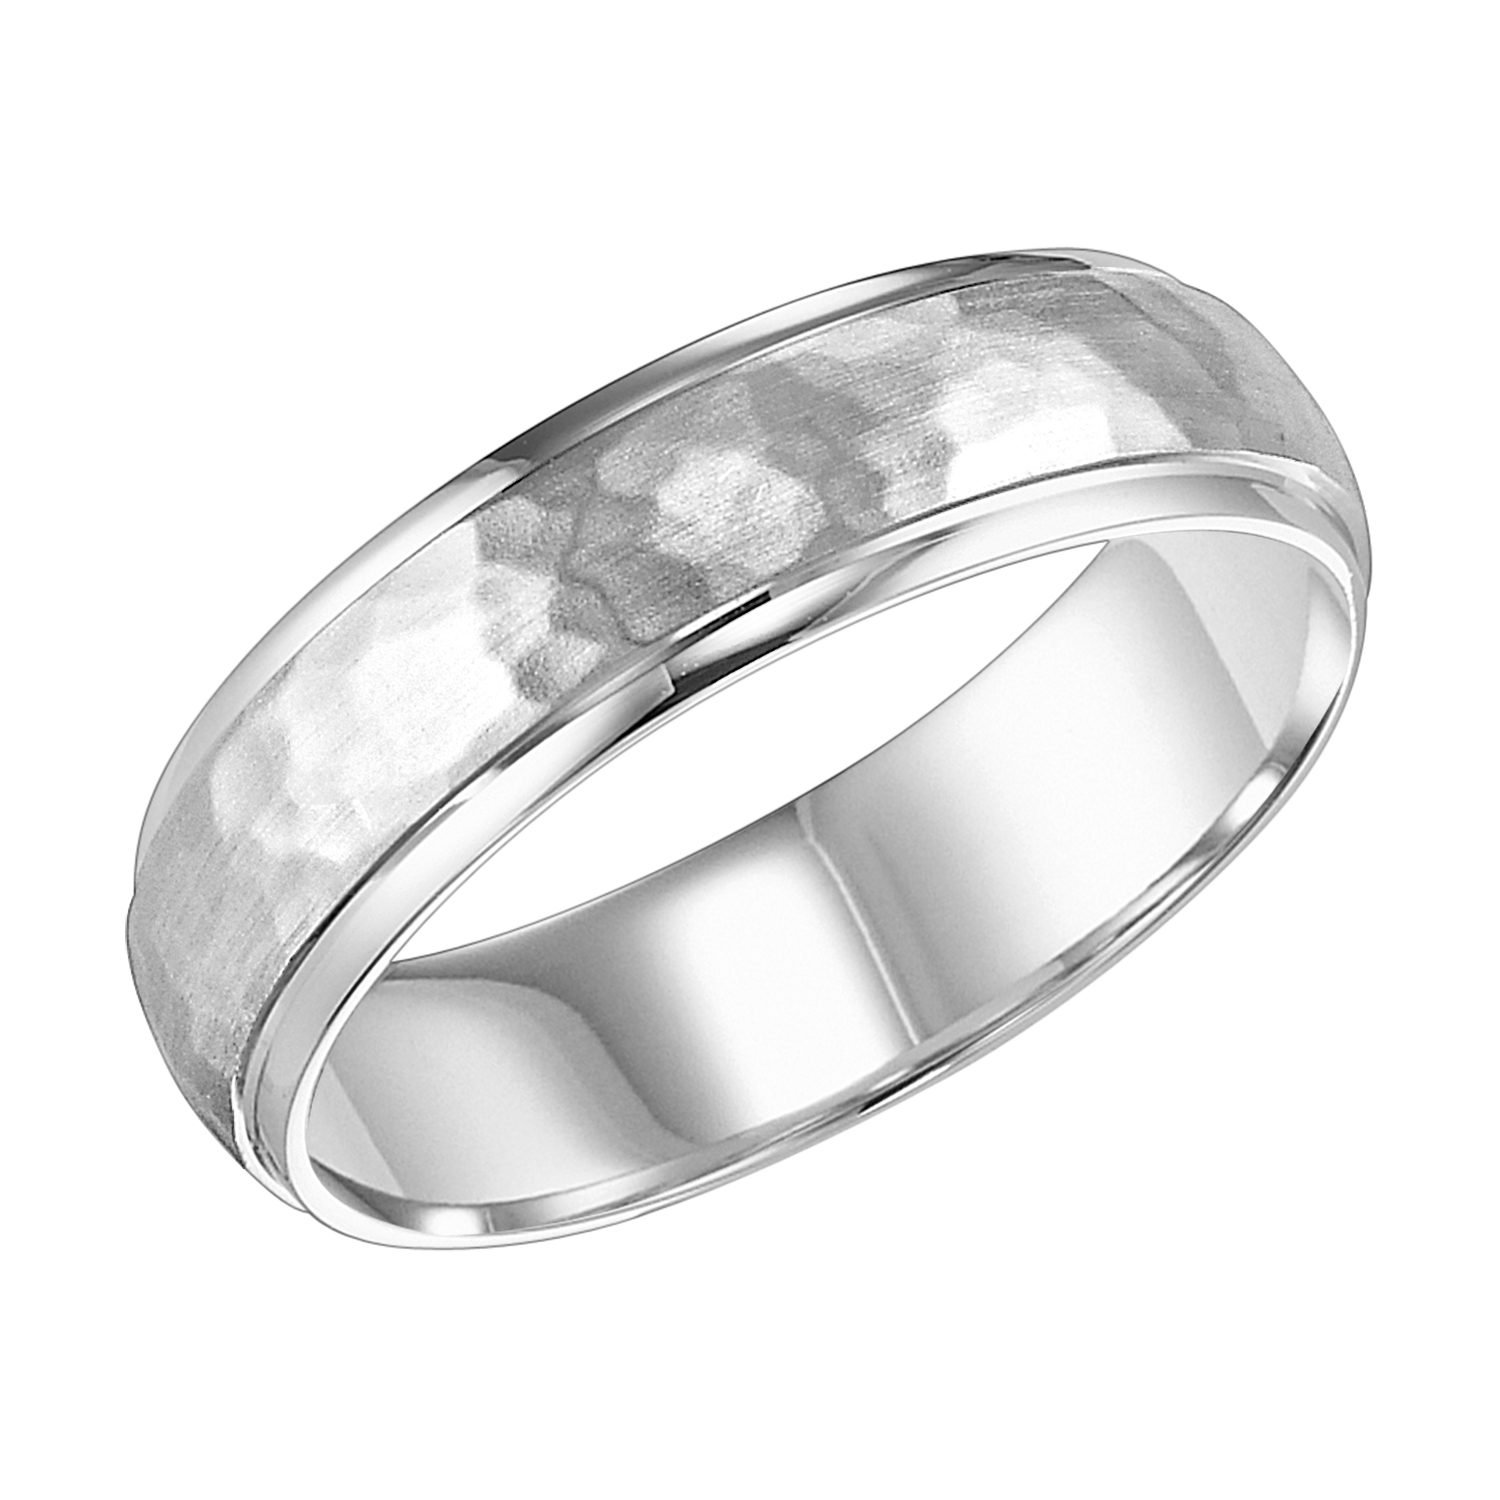 White Gold Hammered Round Edge Comfort Fit Wedding Band | 6mm | Size 4.5